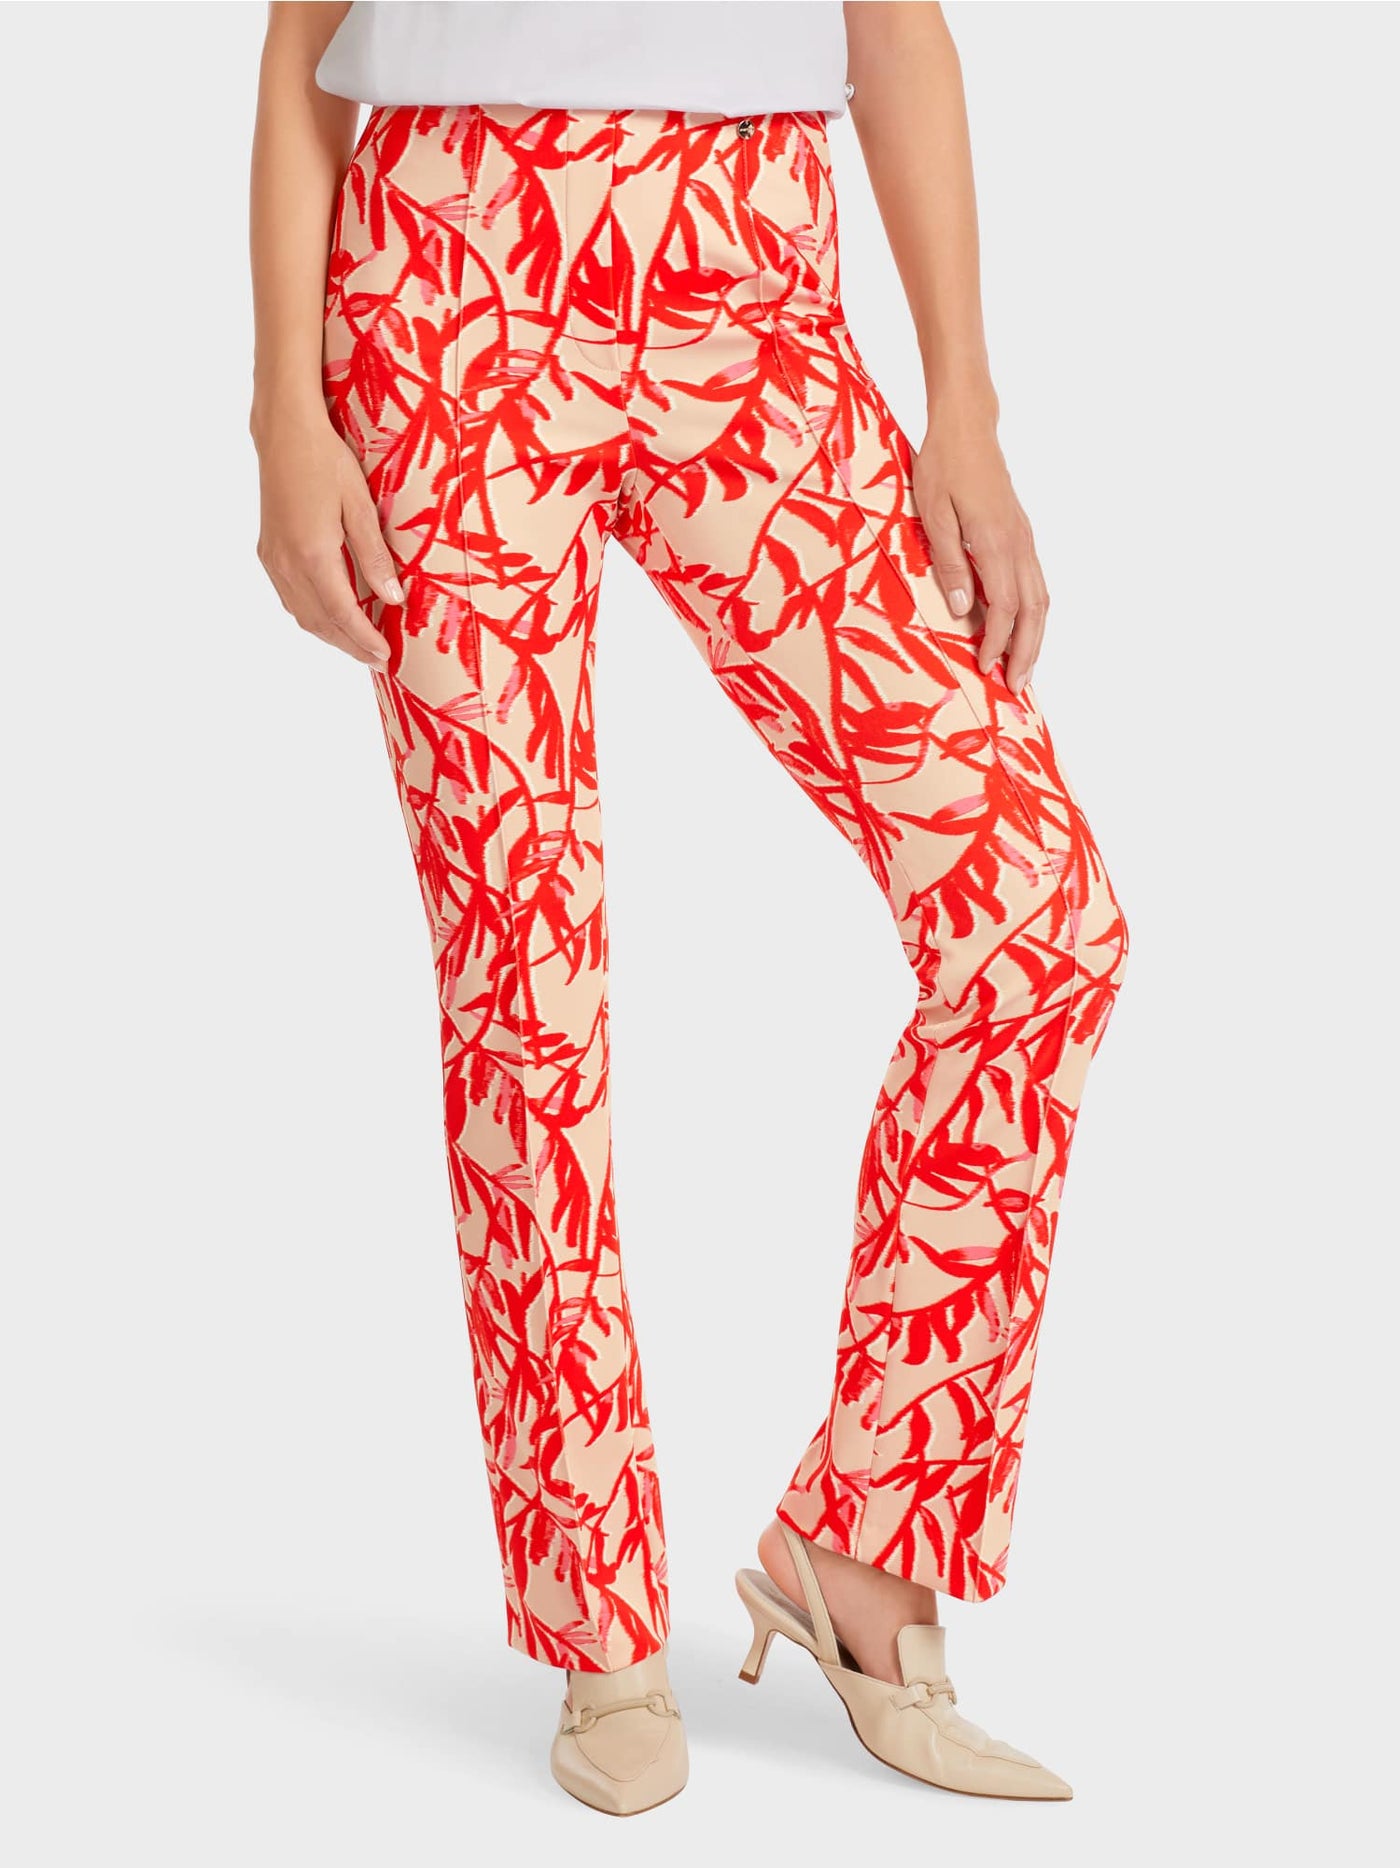 Pants in a floral print